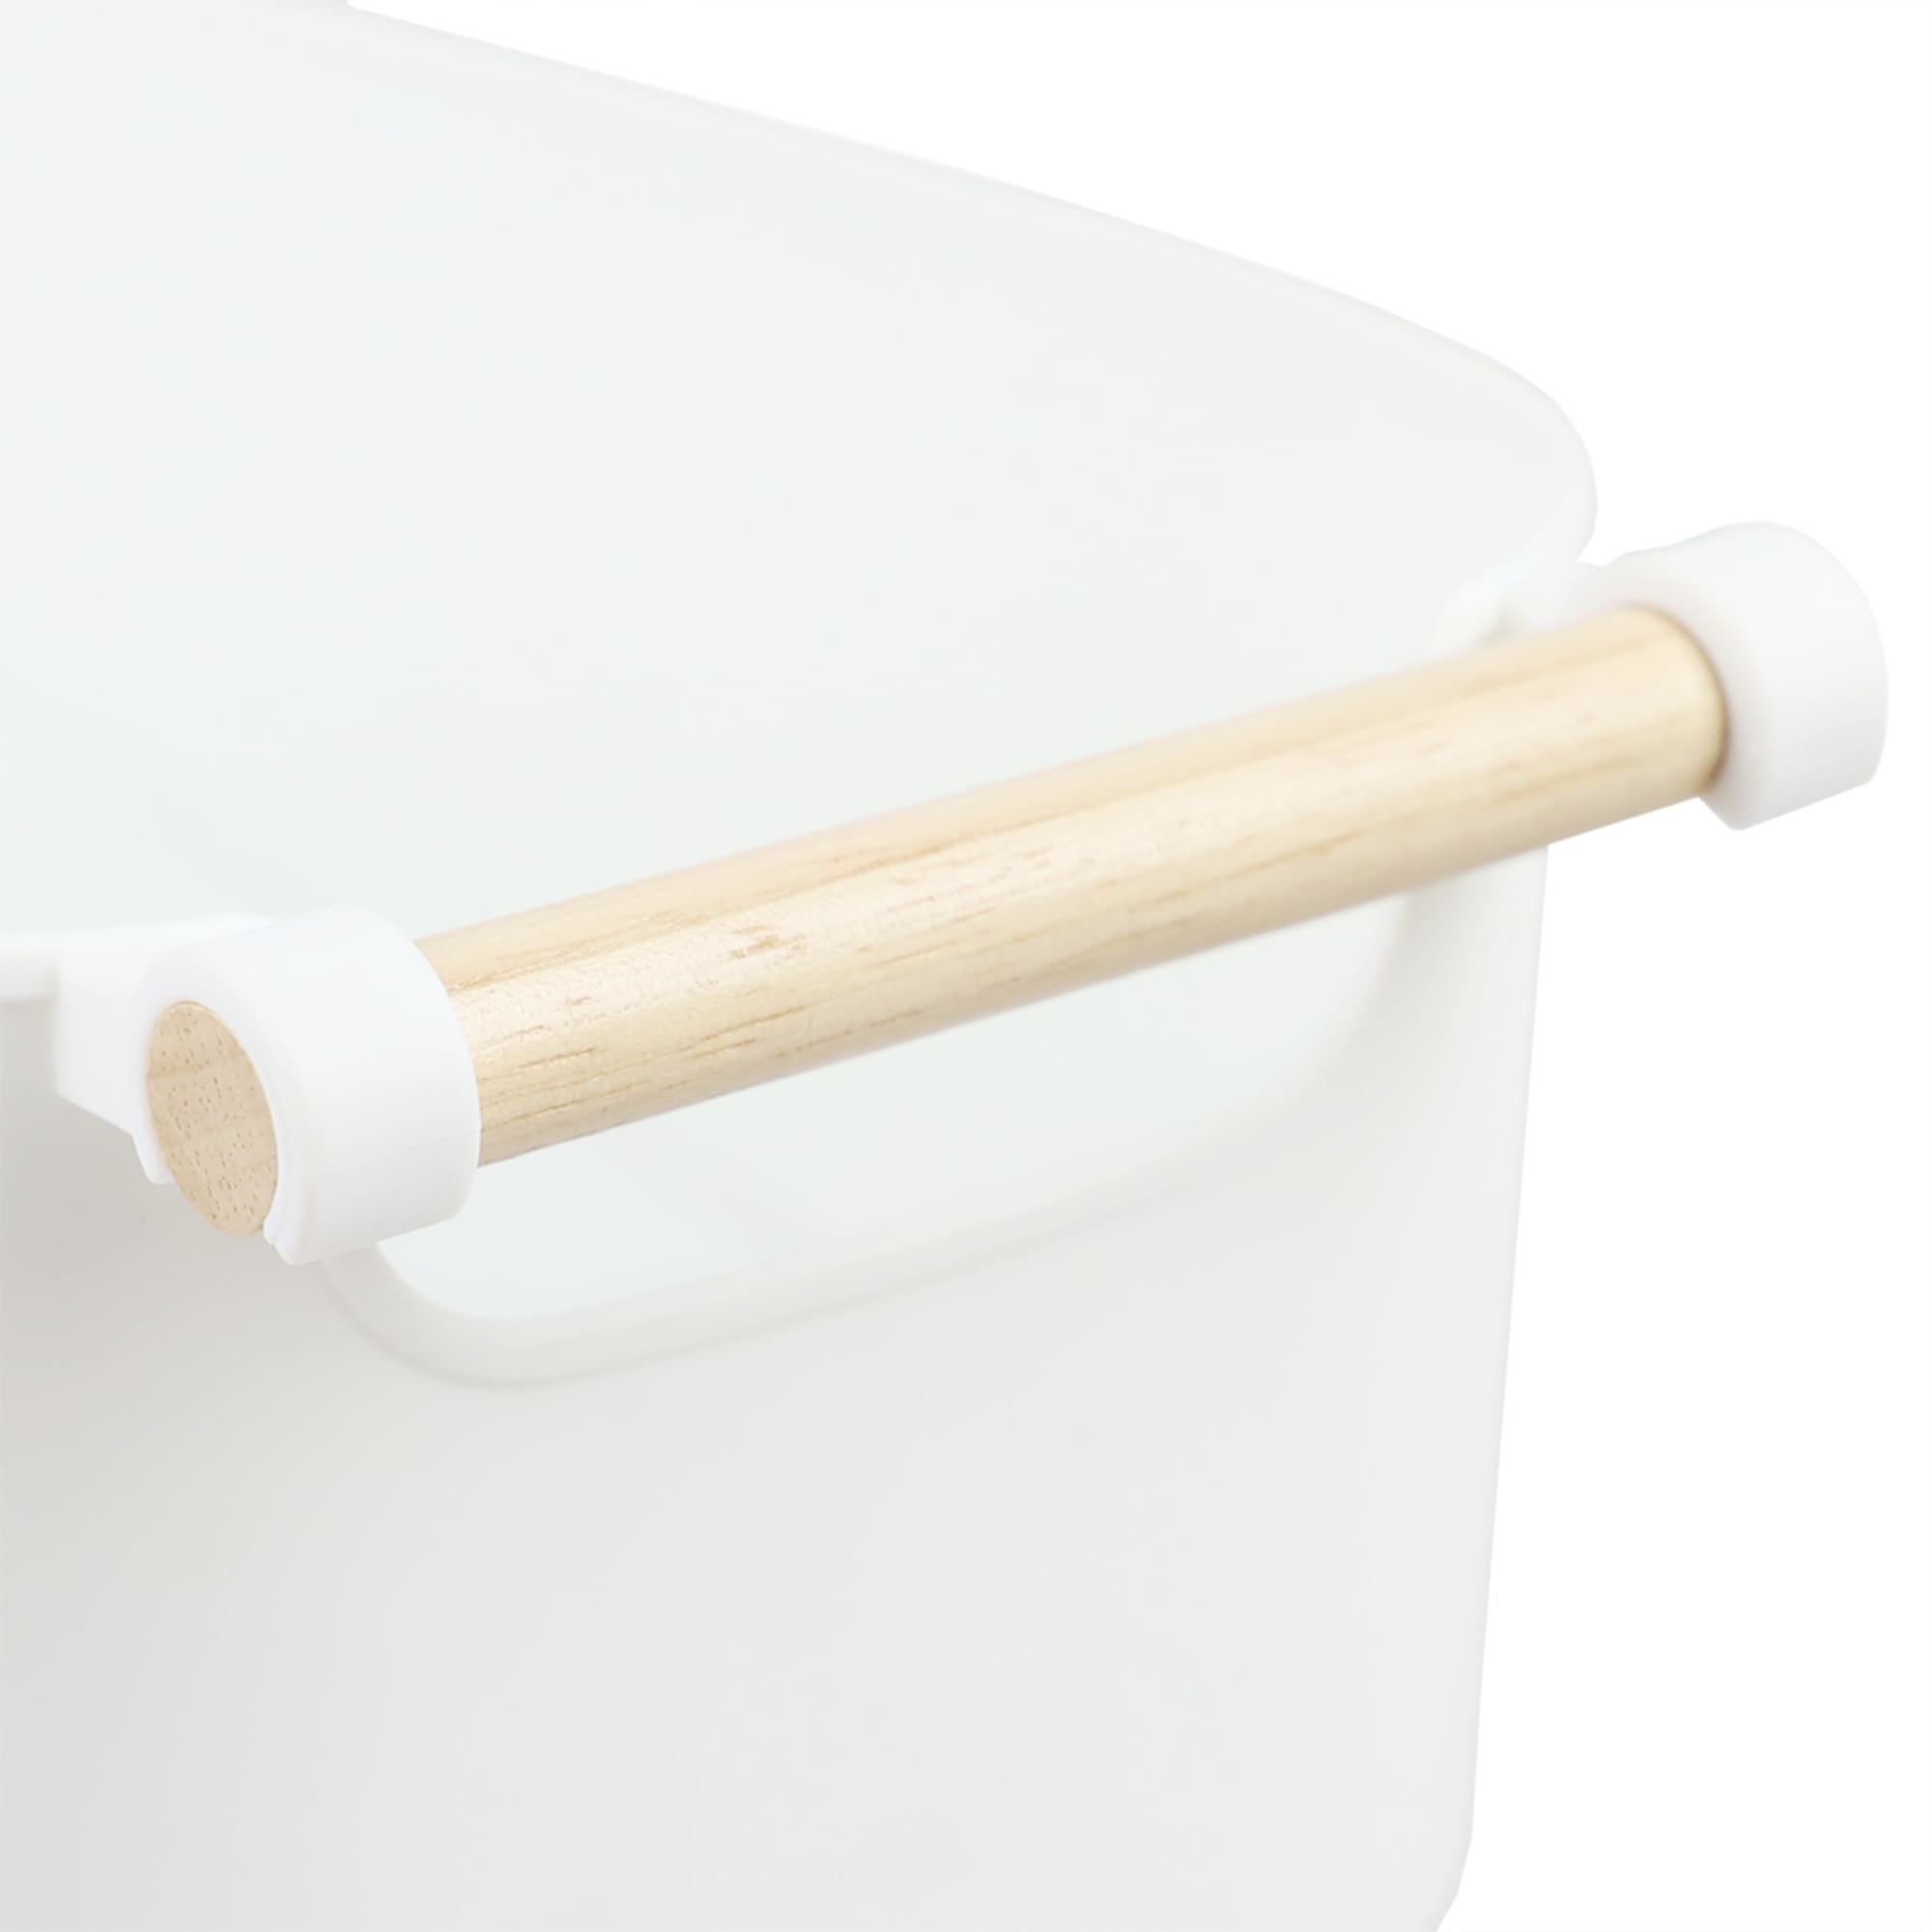 Home Basics Large Plastic Basket with Wooden Handle, White $10.00 EACH, CASE PACK OF 12